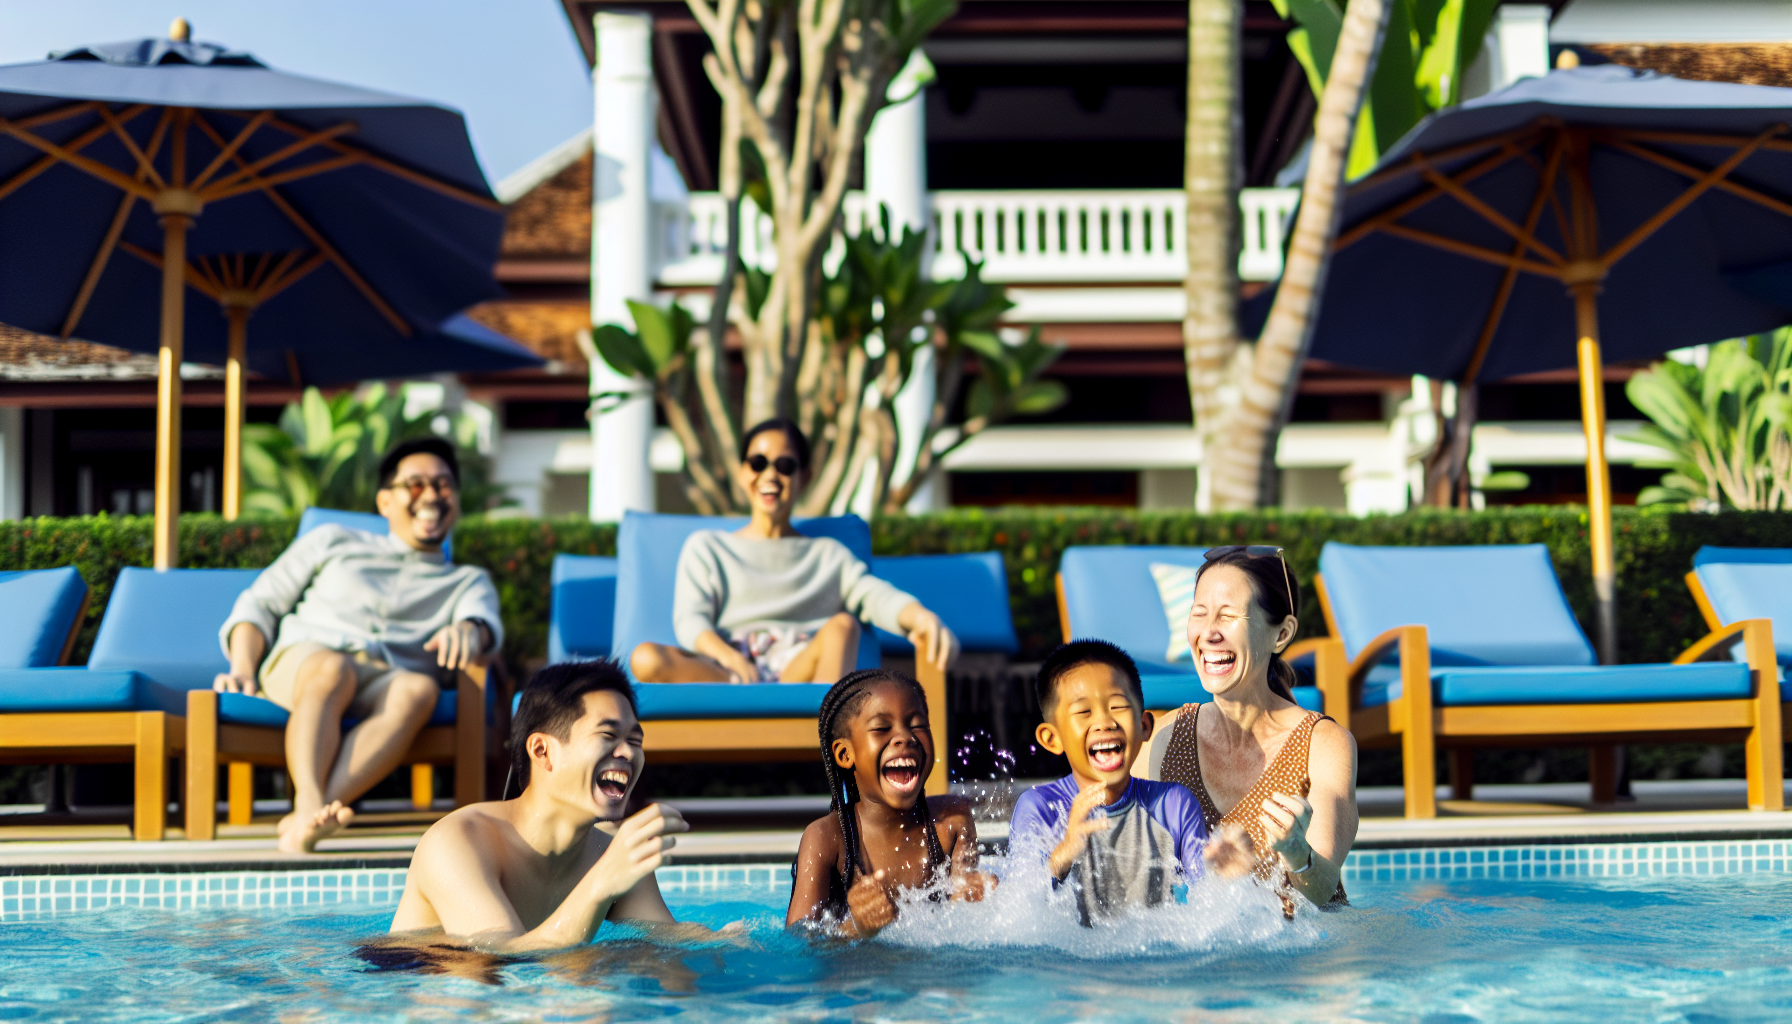 A family enjoying the swimming pool at a comfortable resort in Laos